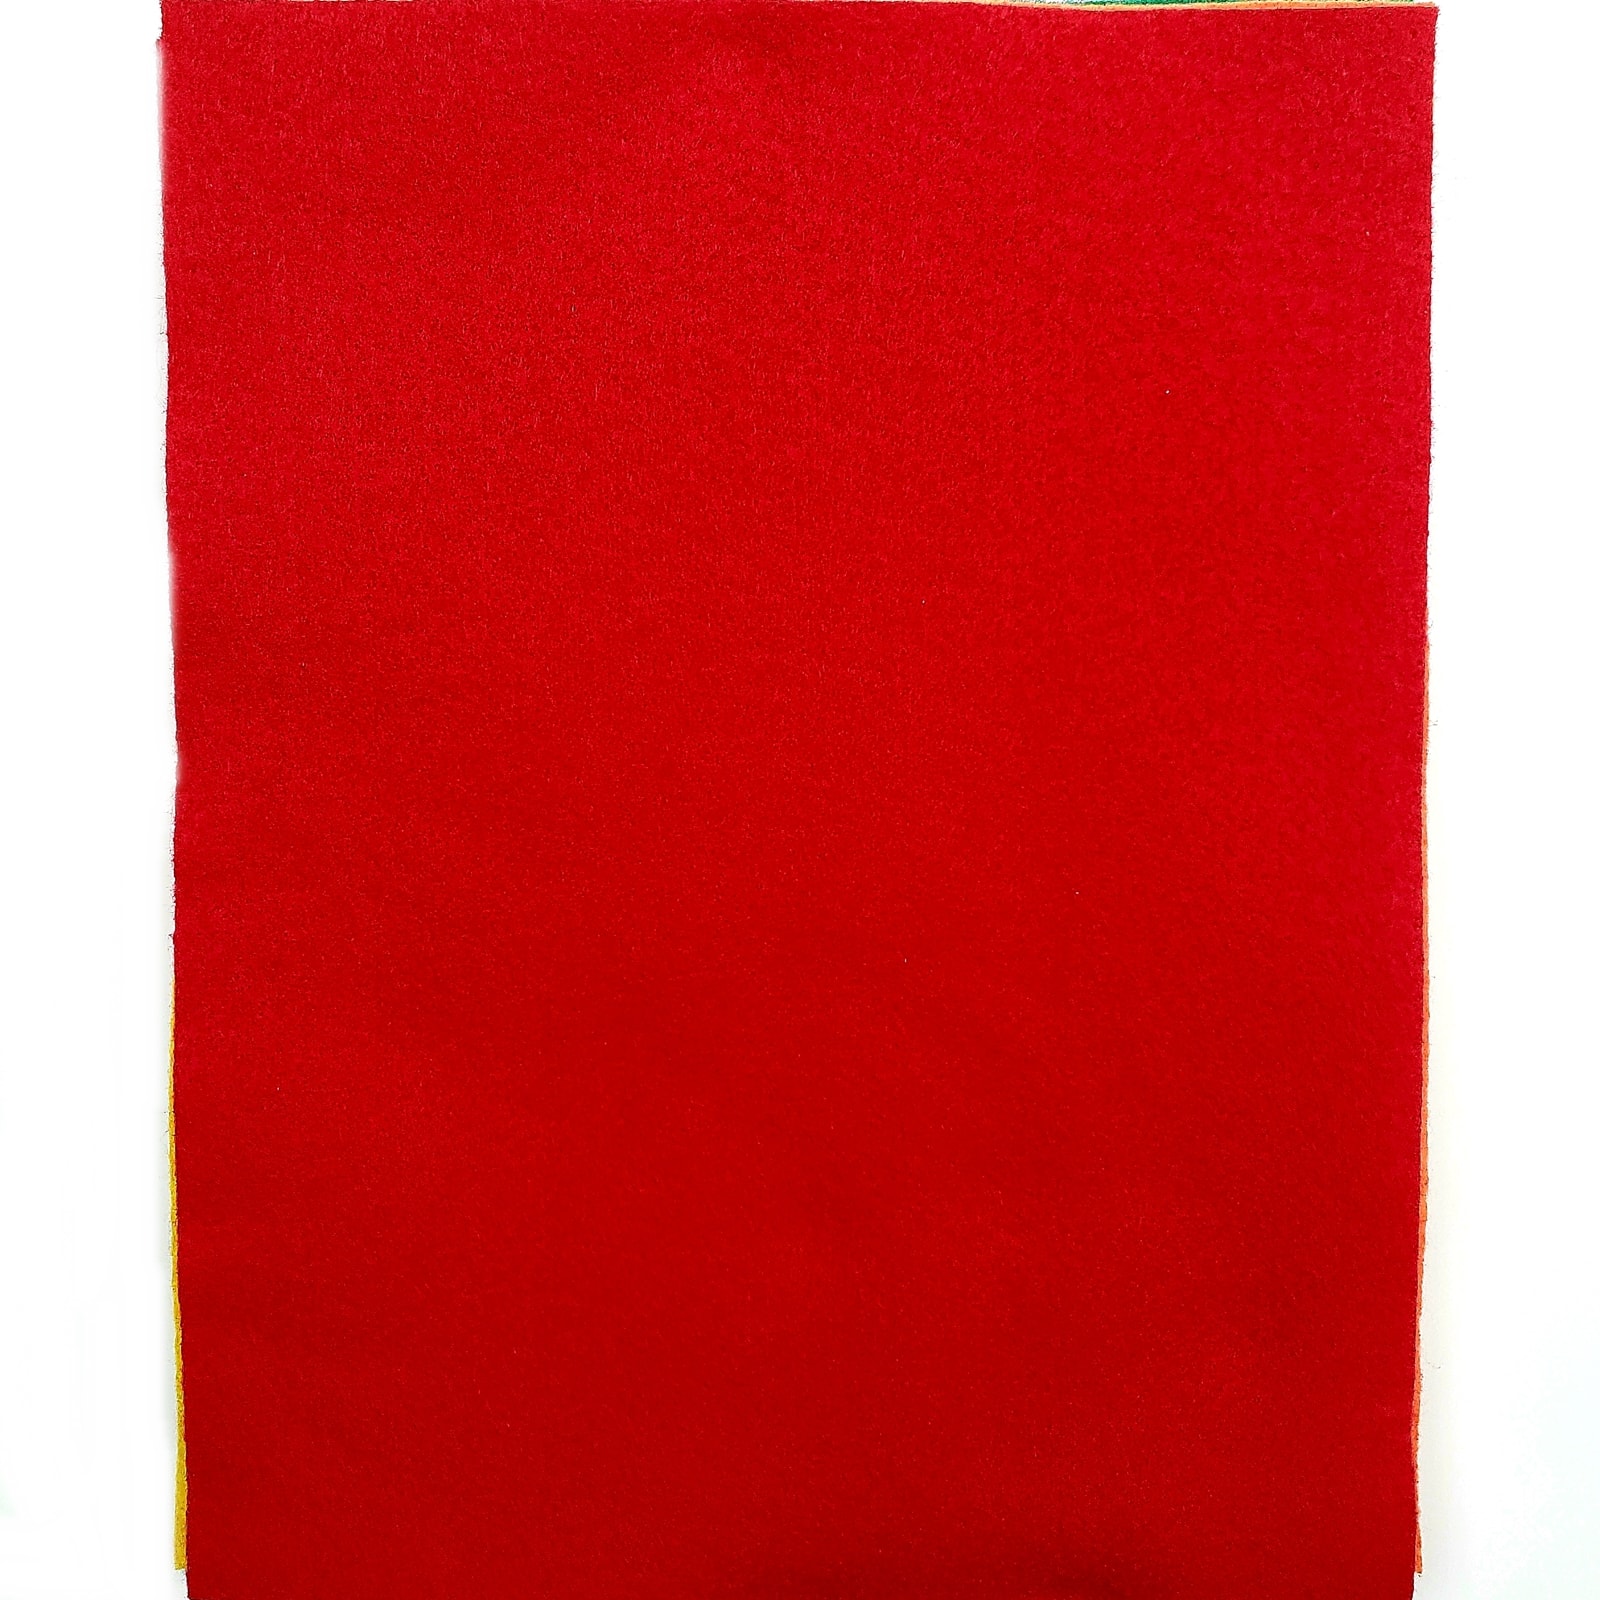 12 Packs: 18 ct. (216 total) Felt Sheets by Creatology&#x2122;